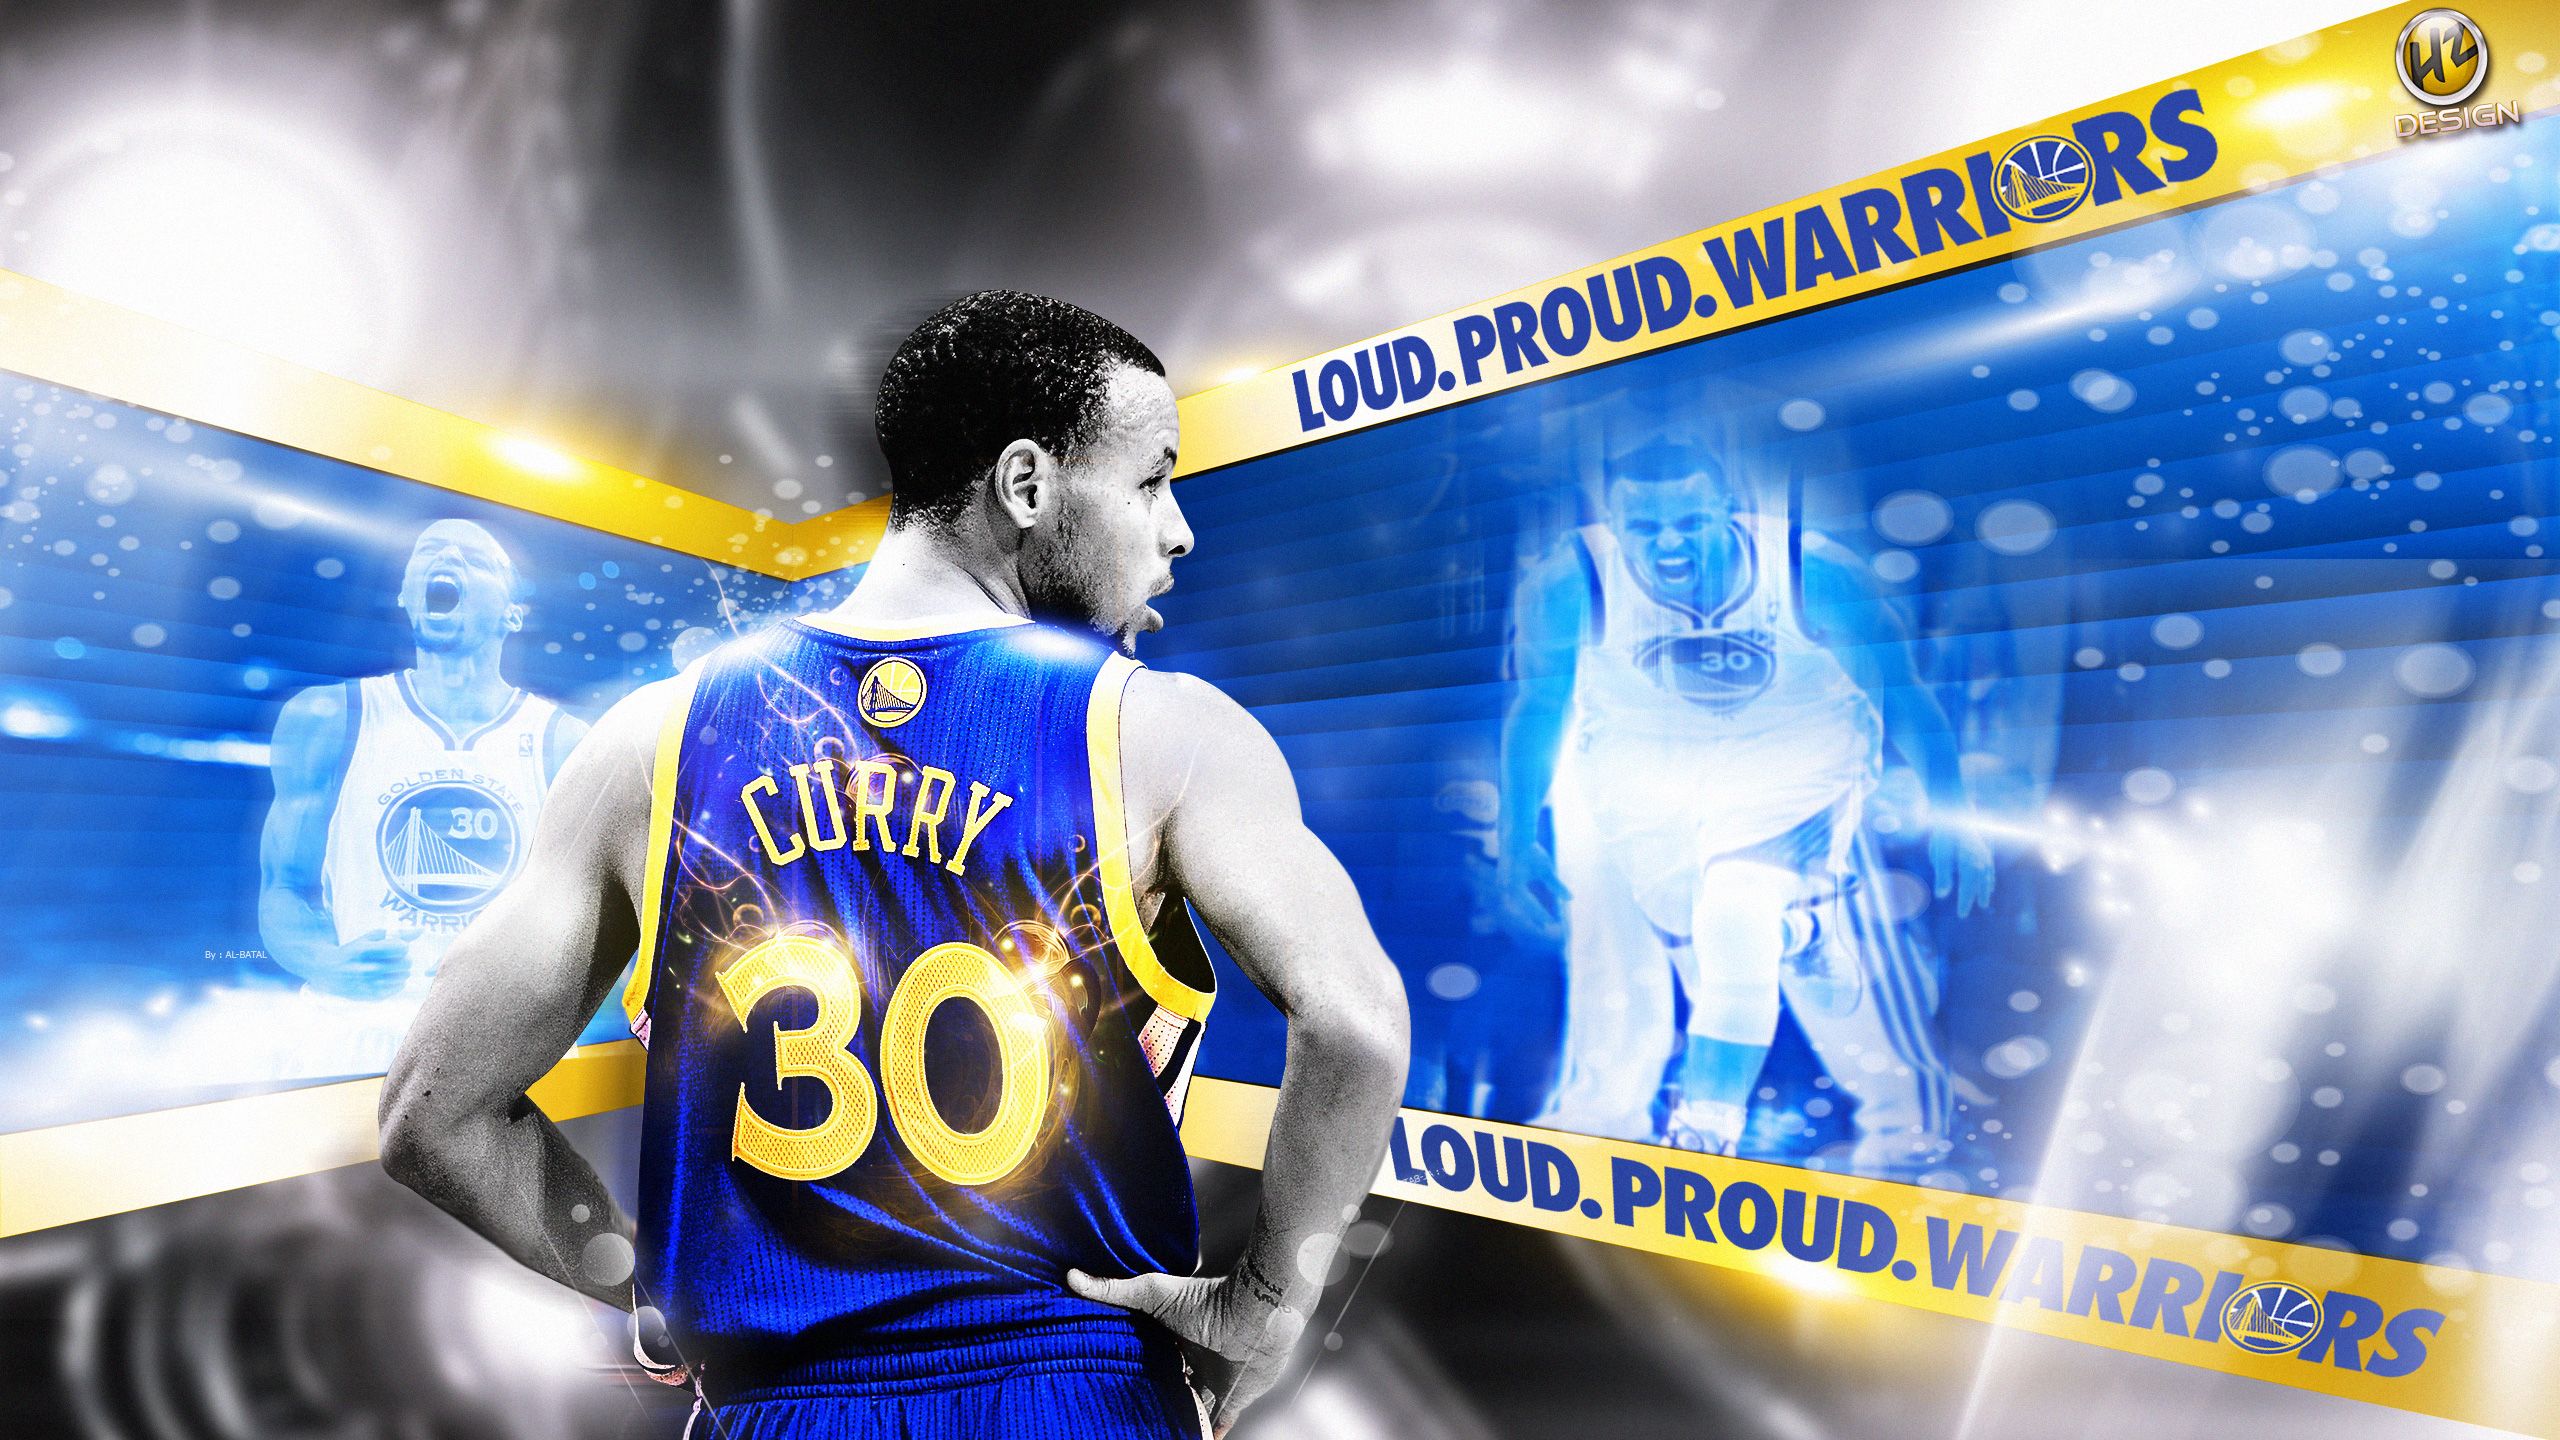 Golden State Warriors Stephen Curry Picture Wallpaper HD. Stephen curry wallpaper, Warriors stephen curry, Stephen curry picture